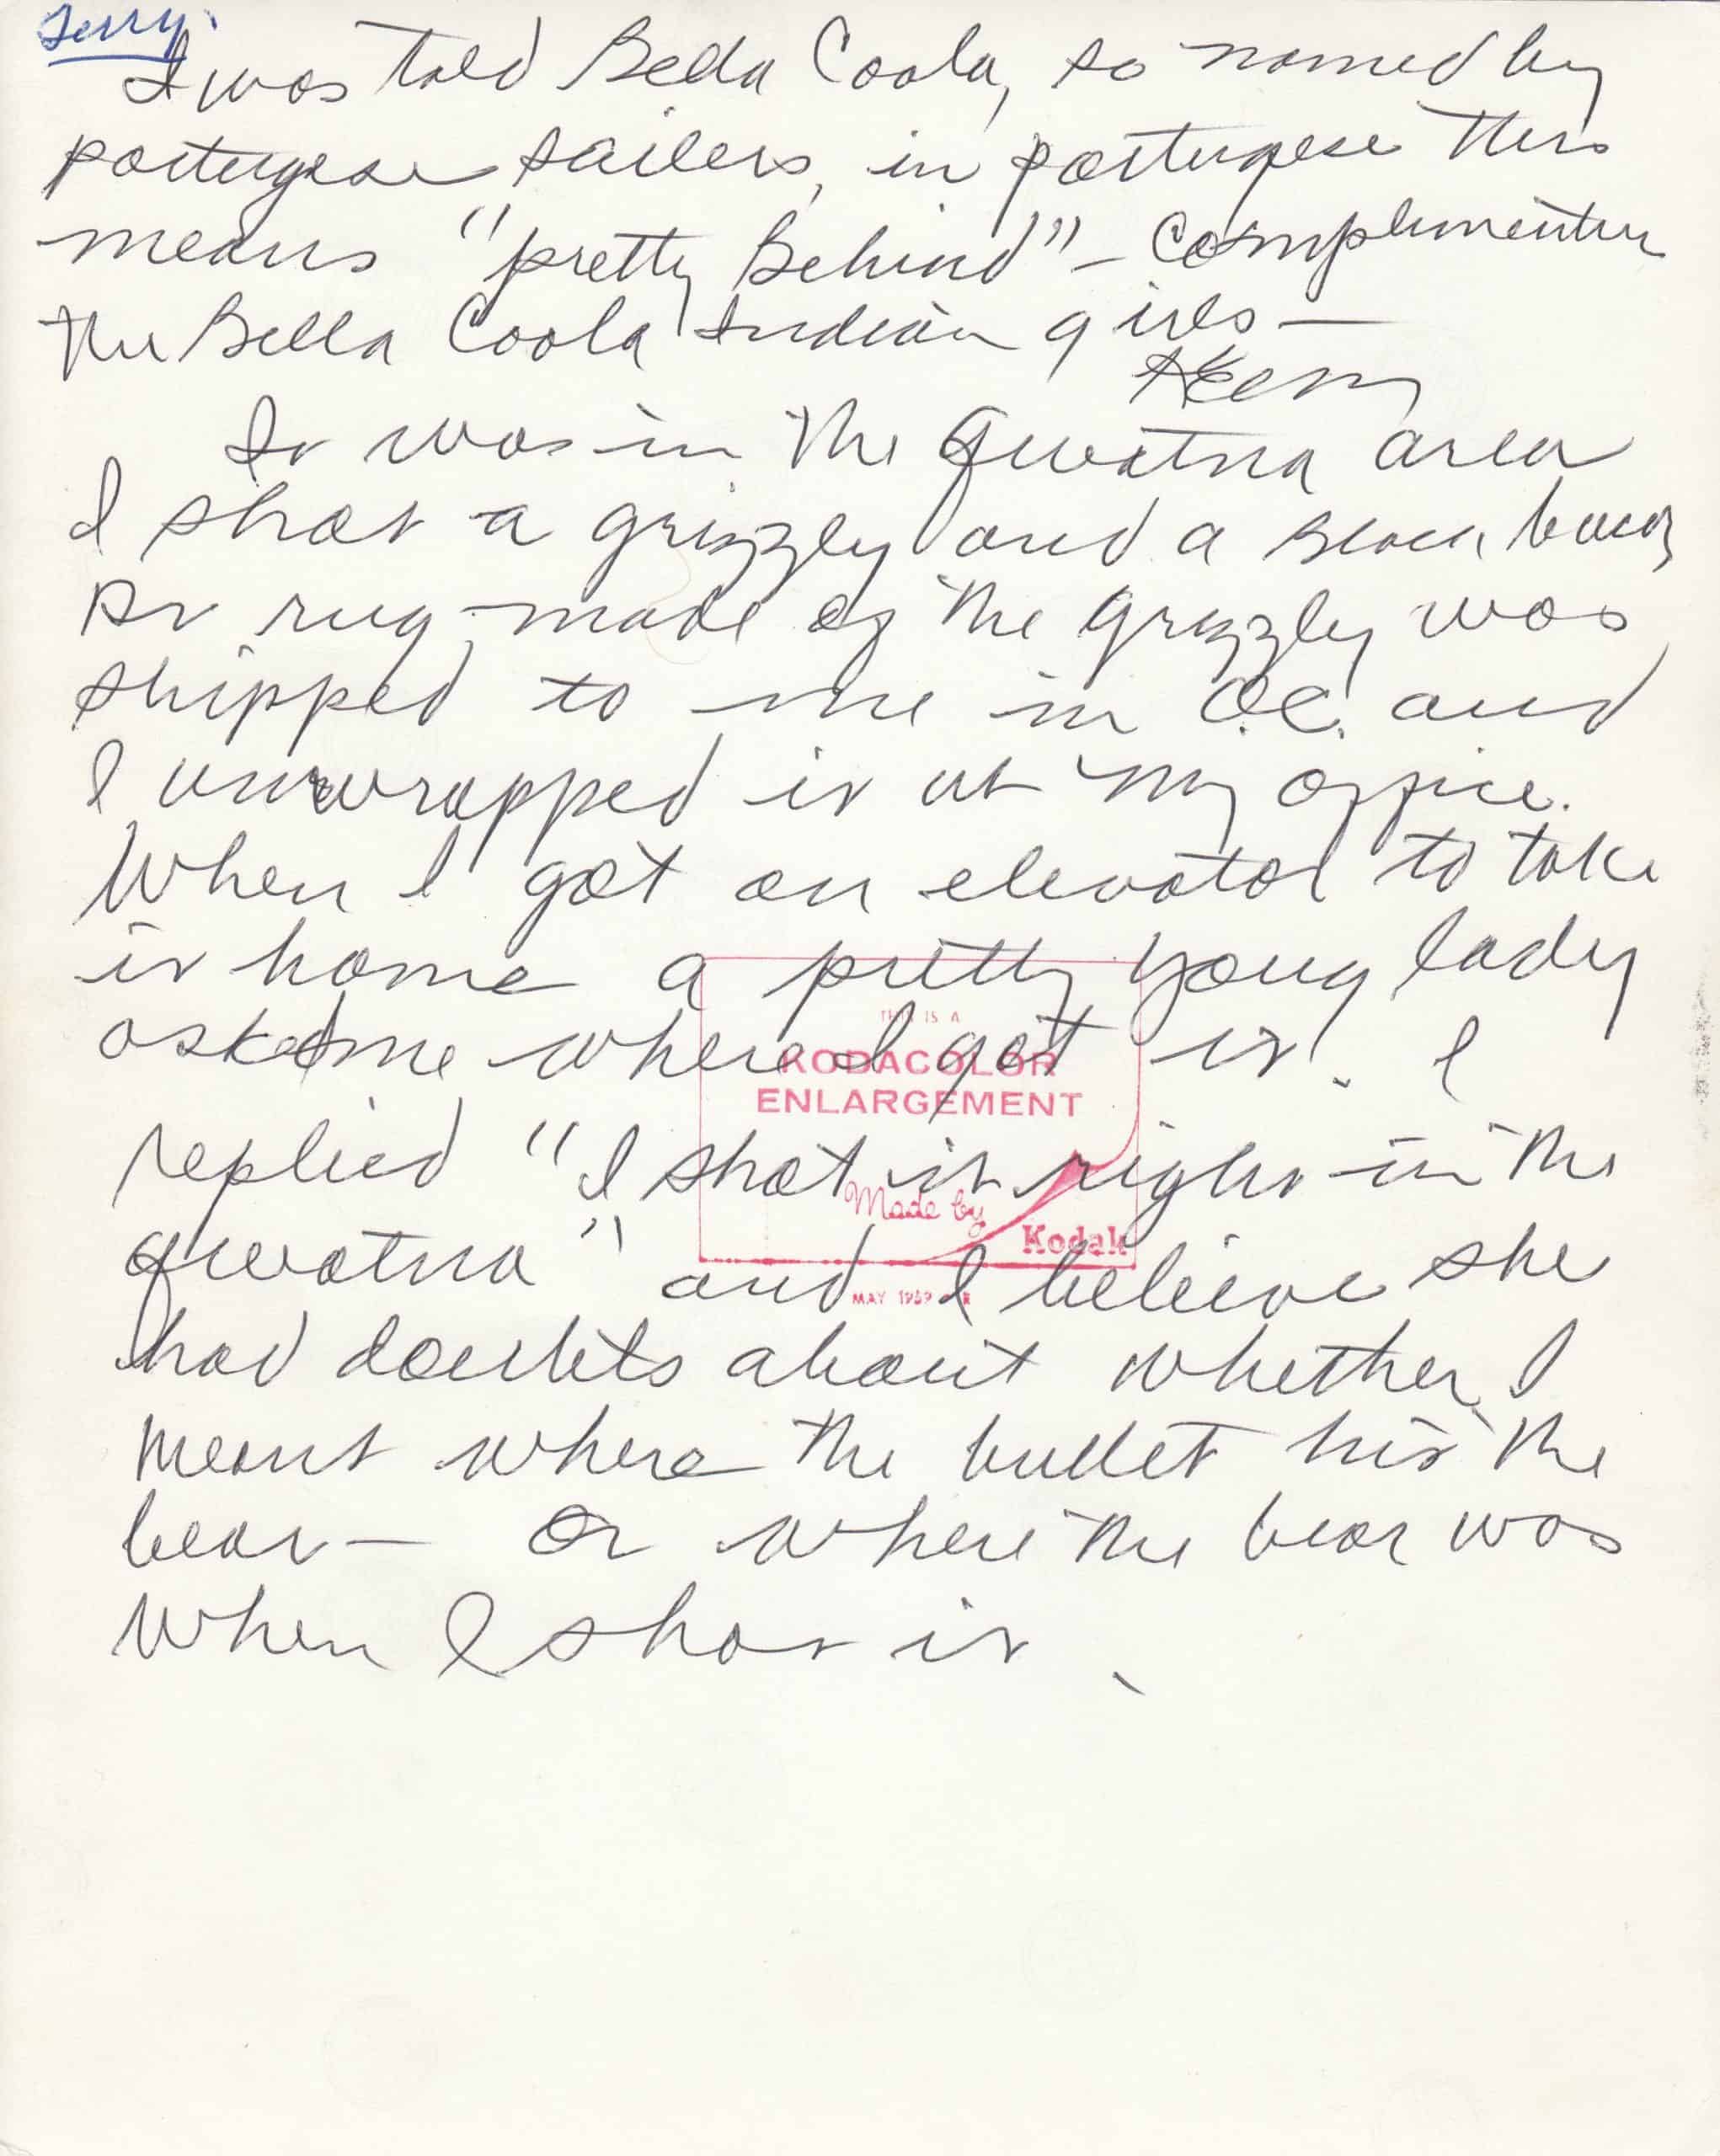 Photo of Ken McAfee's handwritten inscription by Ken McAfee on back of photograph